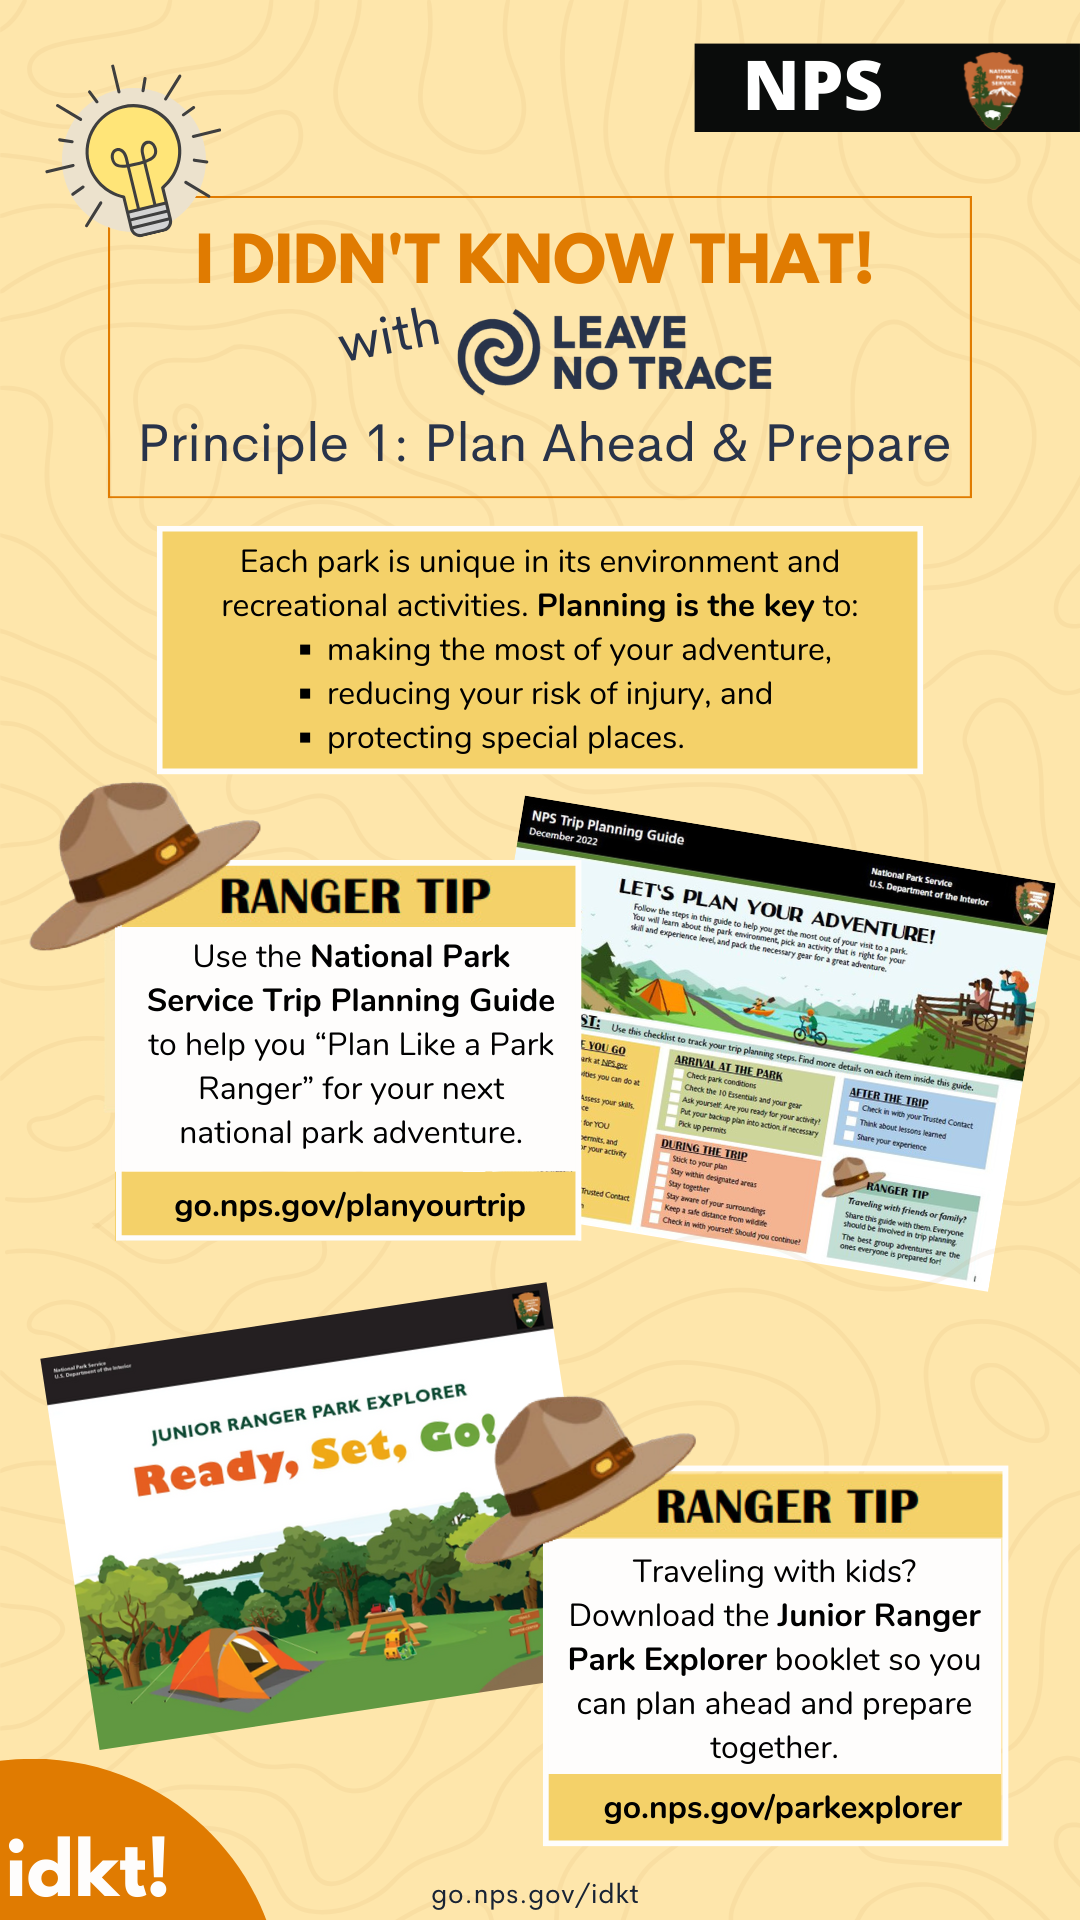 An infographic for "I Didn't Know That! with Leave No Trace Principle 1: Plan Ahead and Prepare" with Ranger tips